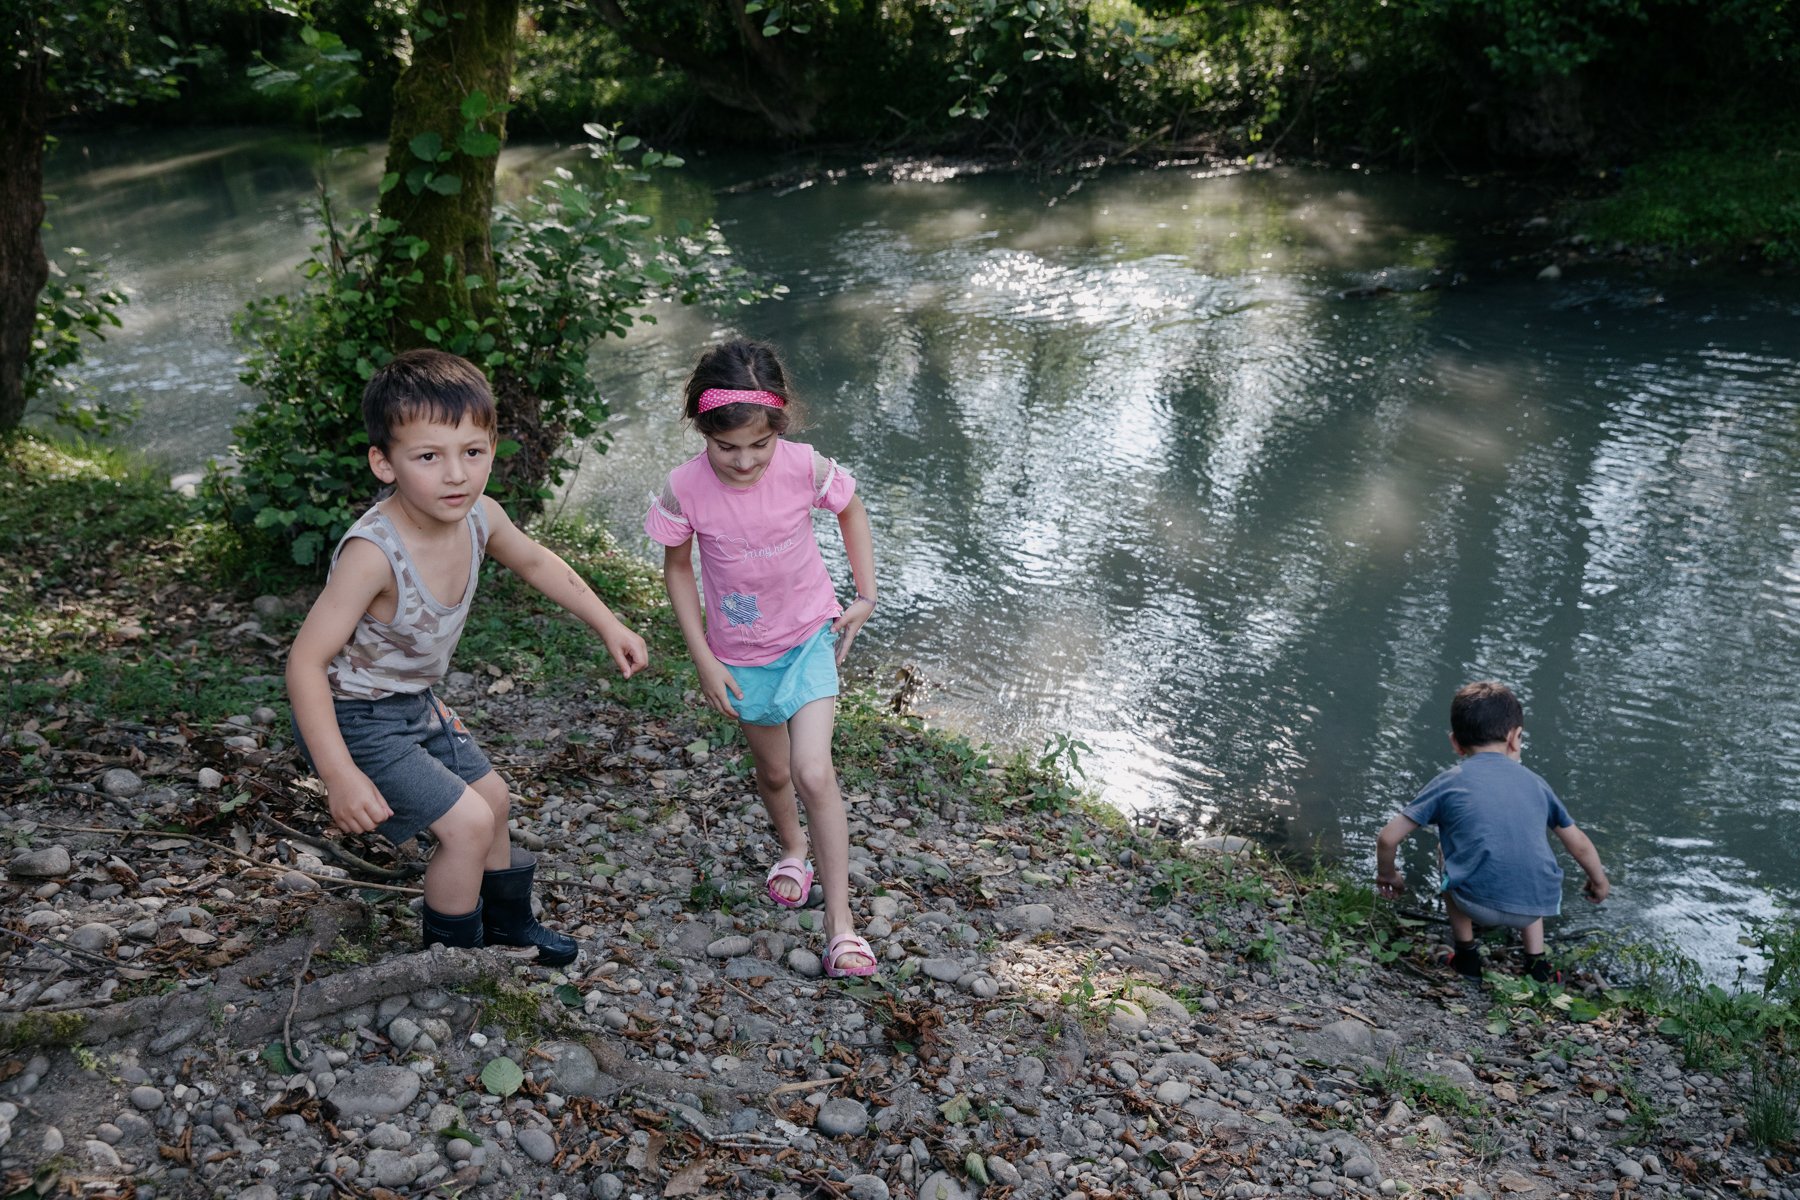  5-year-old Giorgi Ekhvaia, left, plays with friends beside an offshoot of the Enguri River in Khurcha. The opposite bank just a few feet away is occupied Abkhazia. A large Russian base is located in Nabakevi, the village on the other side of the riv